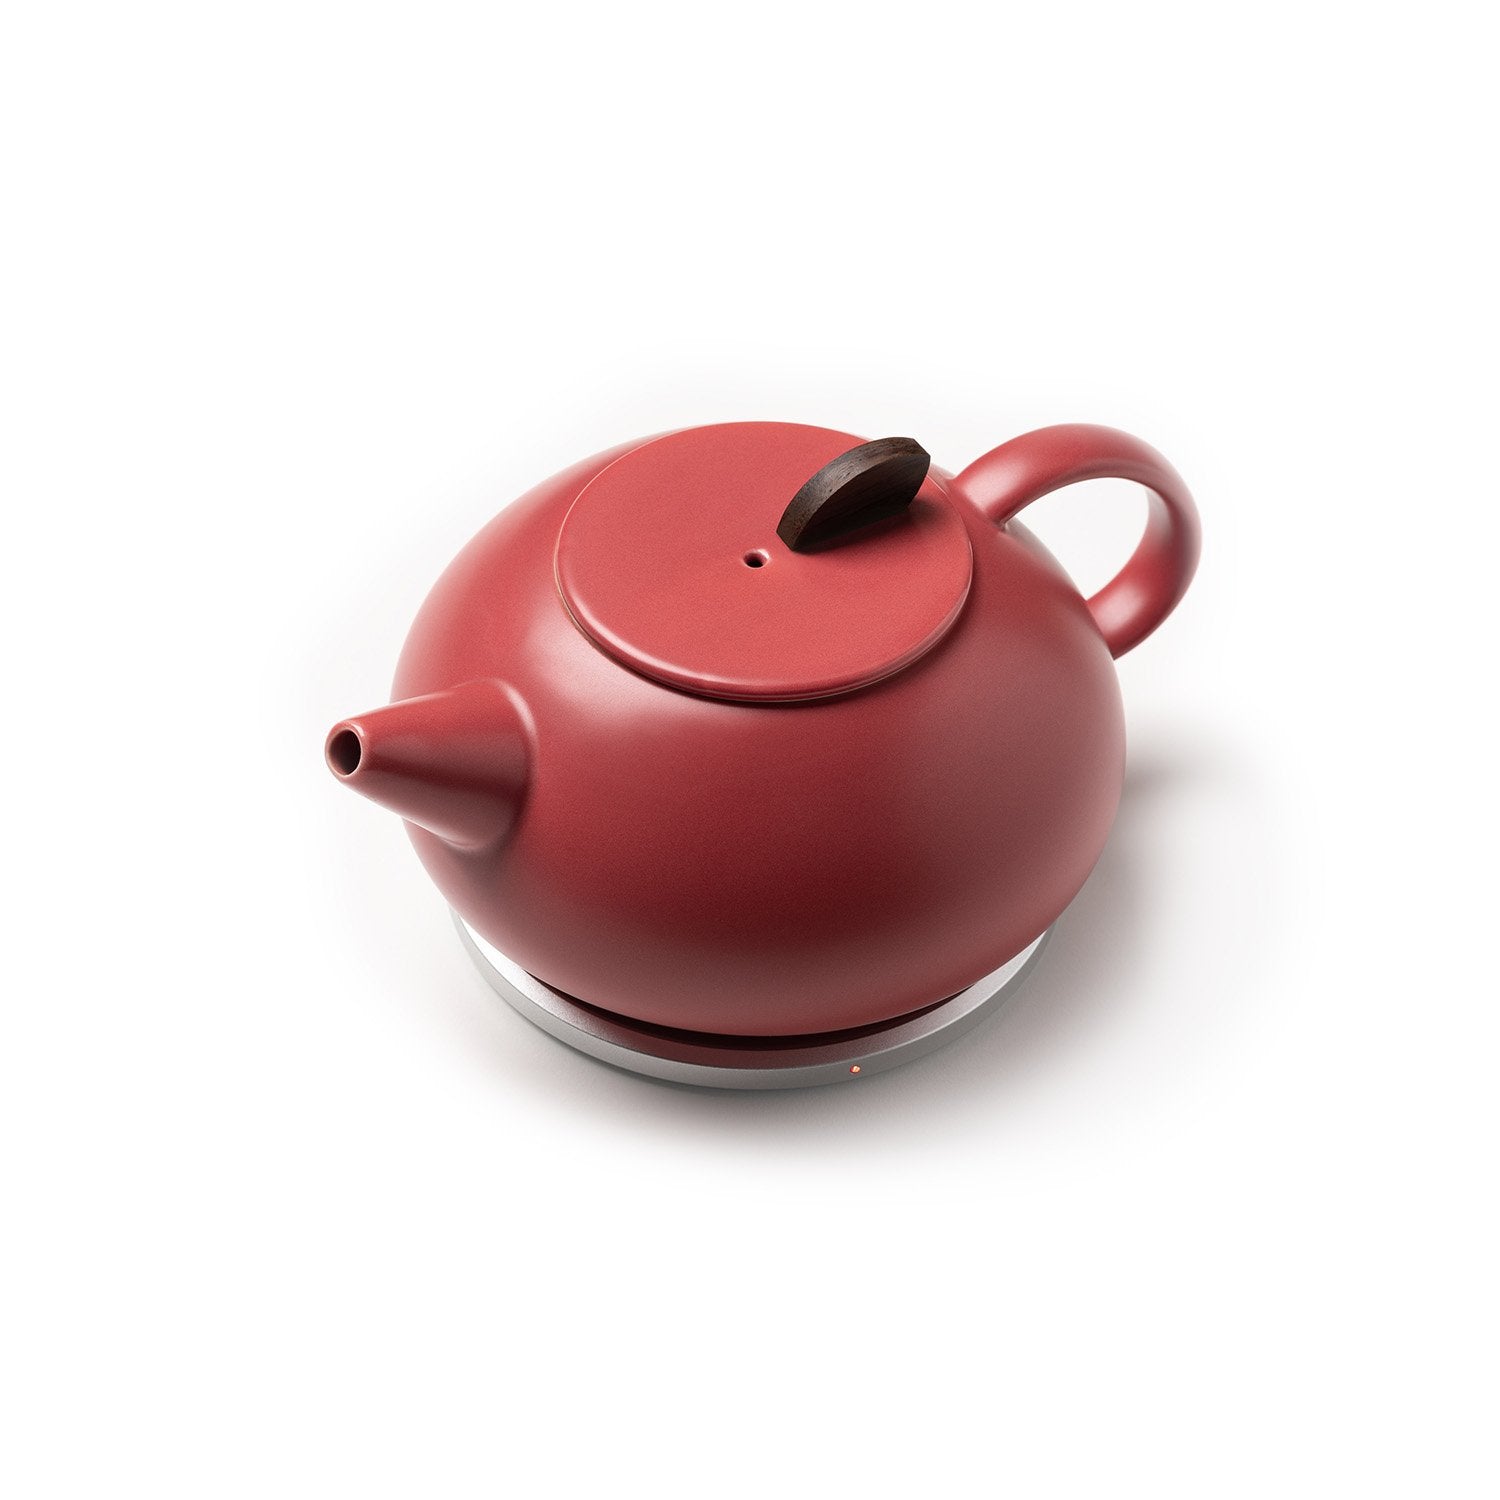 Top view of red teapot on heating pad